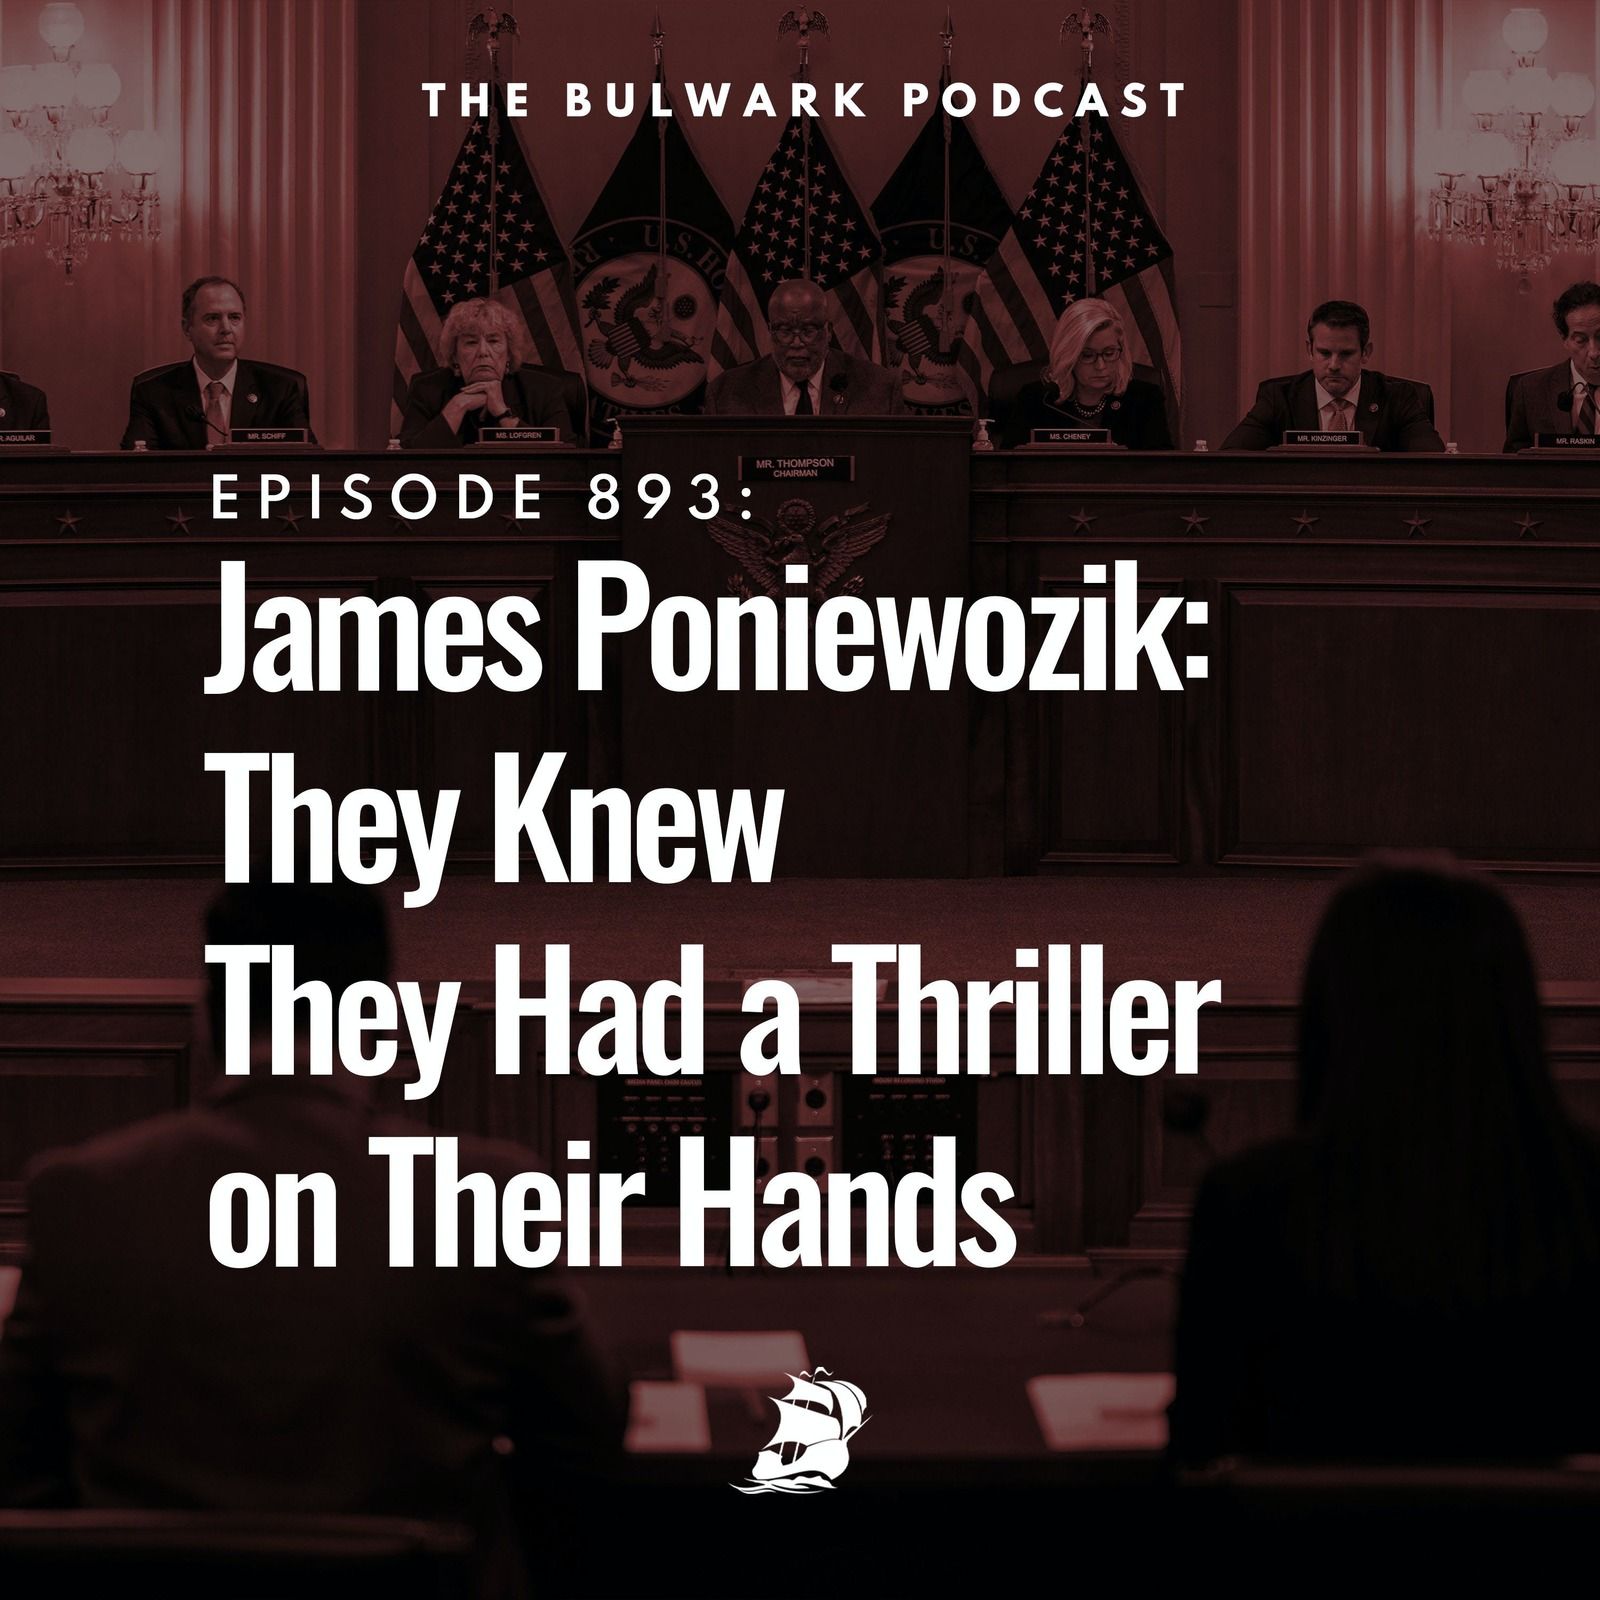 James Poniewozik: They Knew They Had a Thriller on Their Hands by The Bulwark Podcast